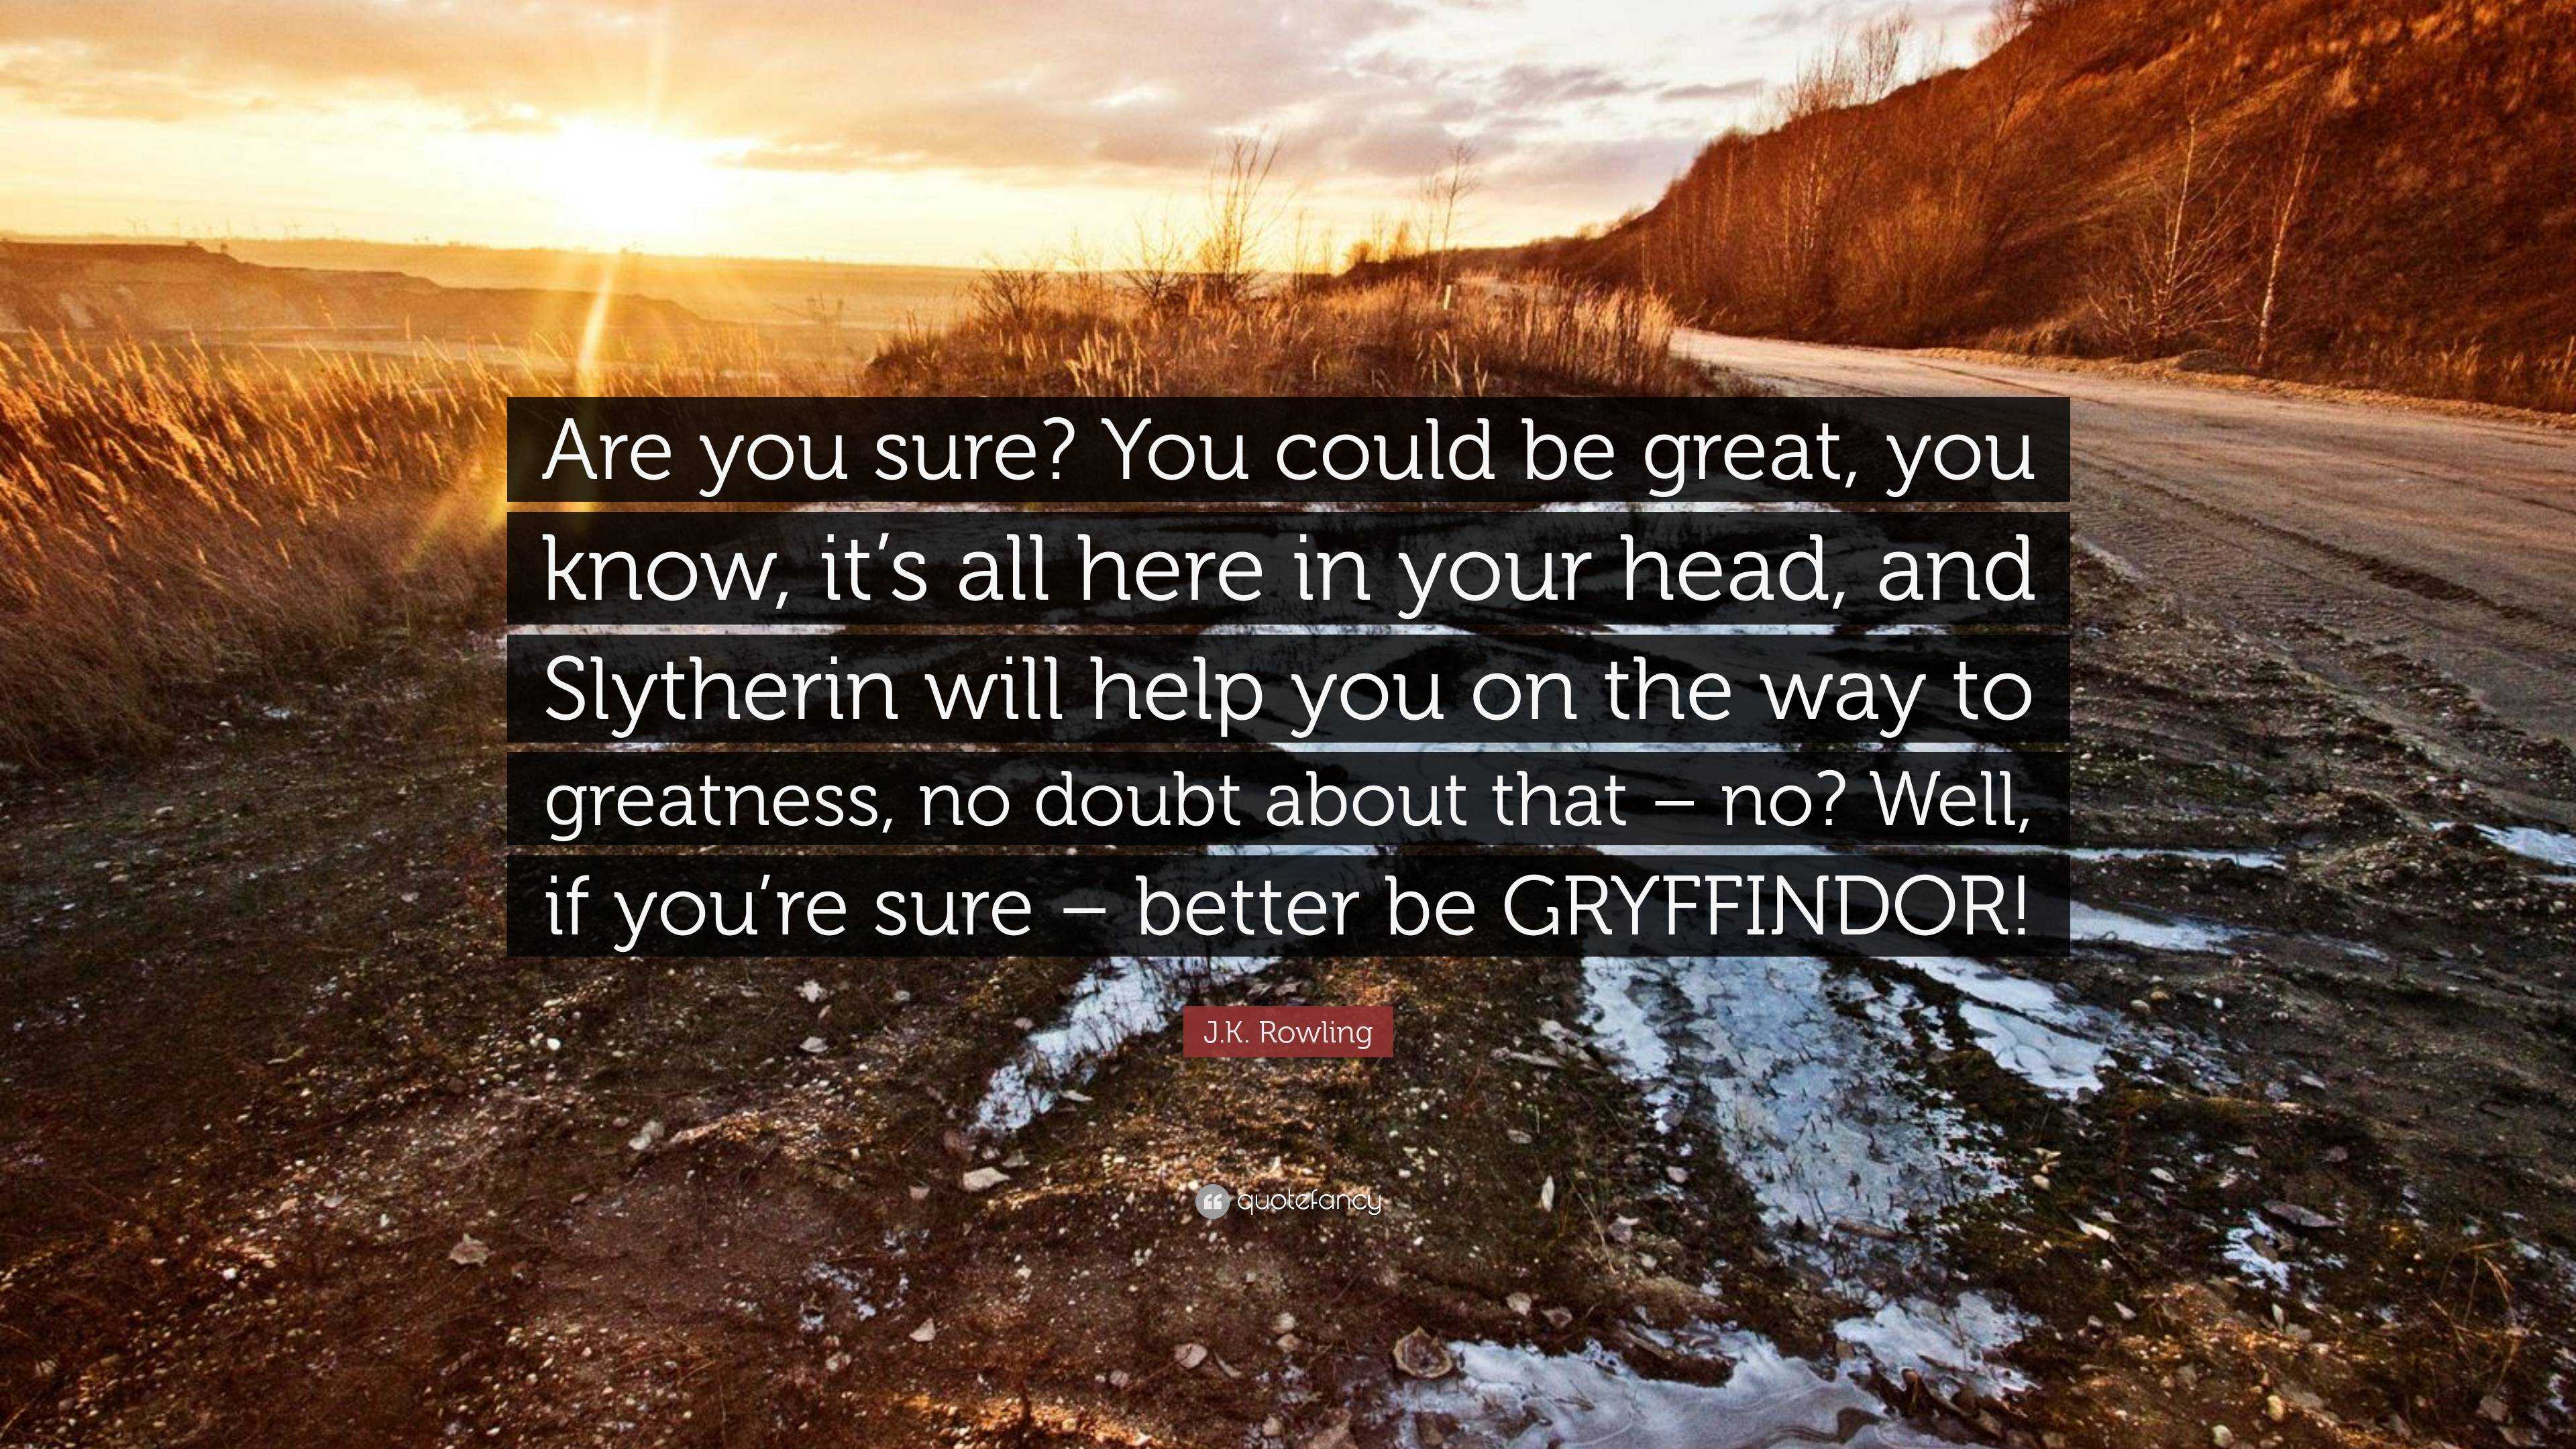 All the different ways you can be a Slytherin